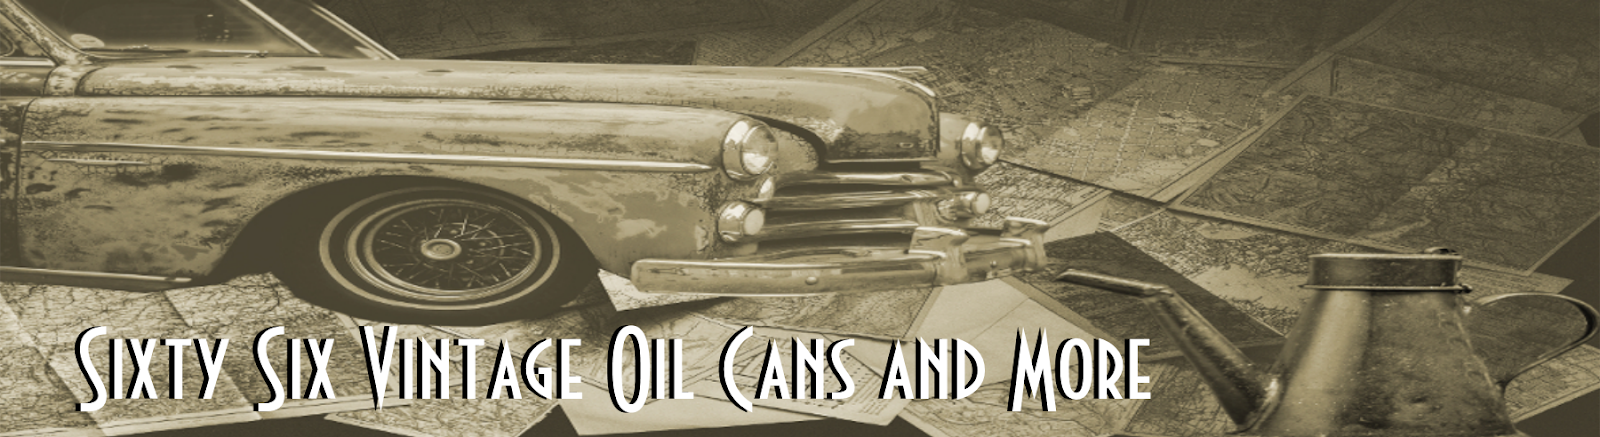 Sixty Six Vintage Oil Cans and More